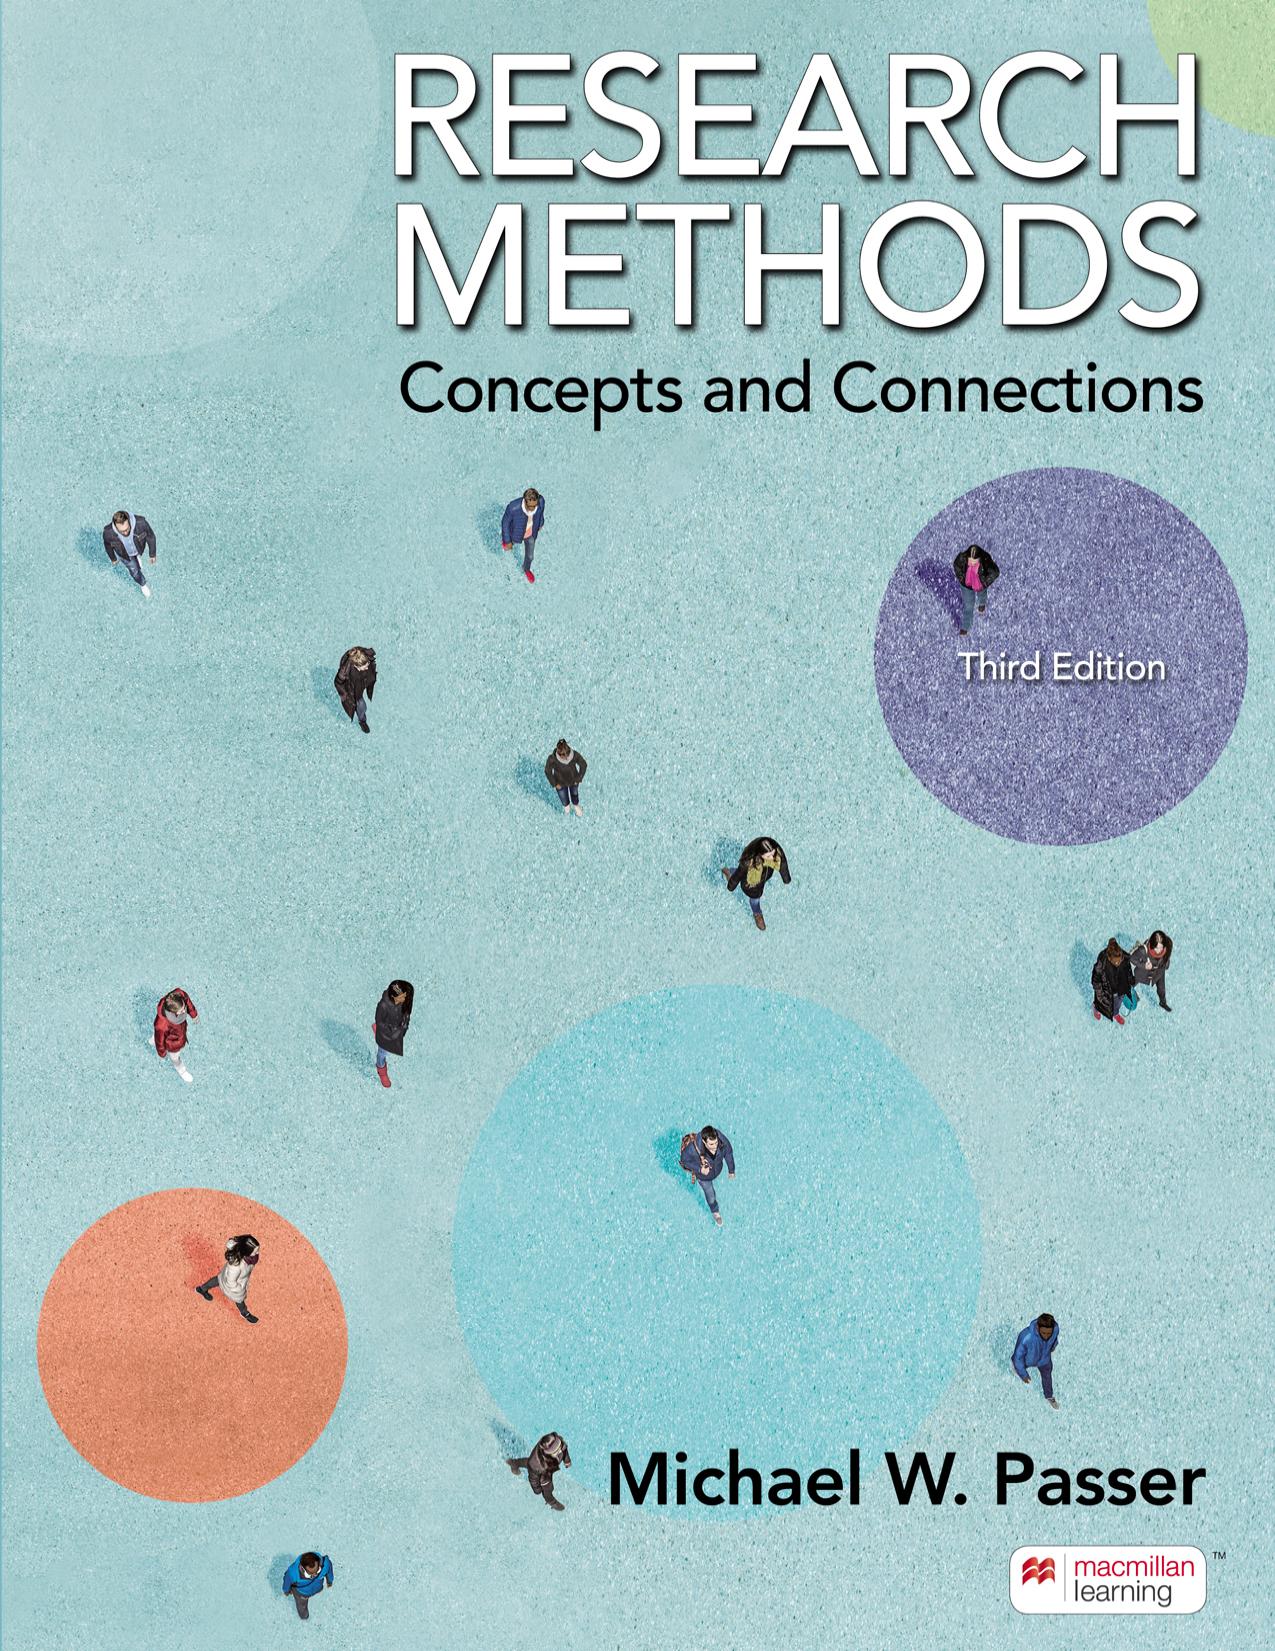 Test Bank for Research Methods Concepts and Connections 3rd Edition by Michael Passer 